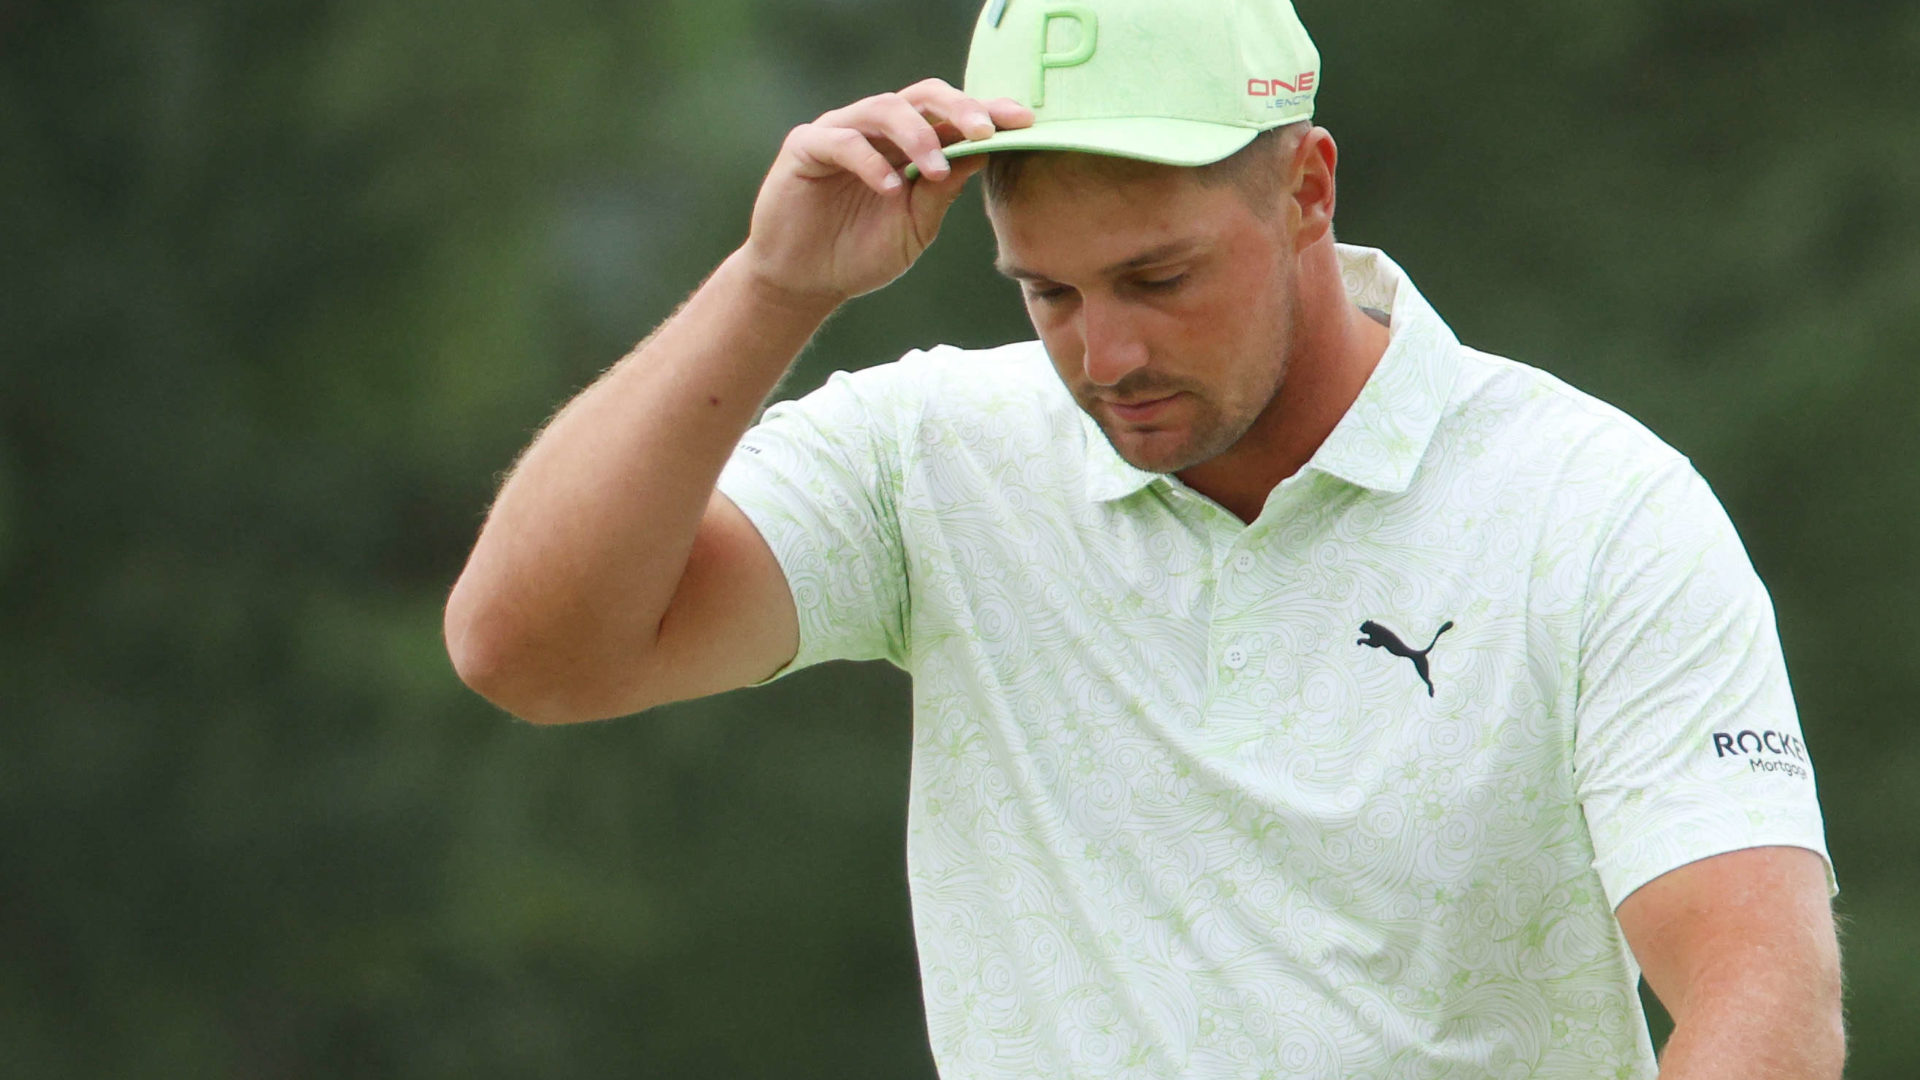 AUGUSTA, GEORGIA - APRIL 08: Bryson DeChambeau reacts on the 18th green after finishing his round during the second round of The Masters at Augusta National Golf Club on April 08, 2022 in Augusta, Georgia. (Photo by Andrew Redington/Getty Images)